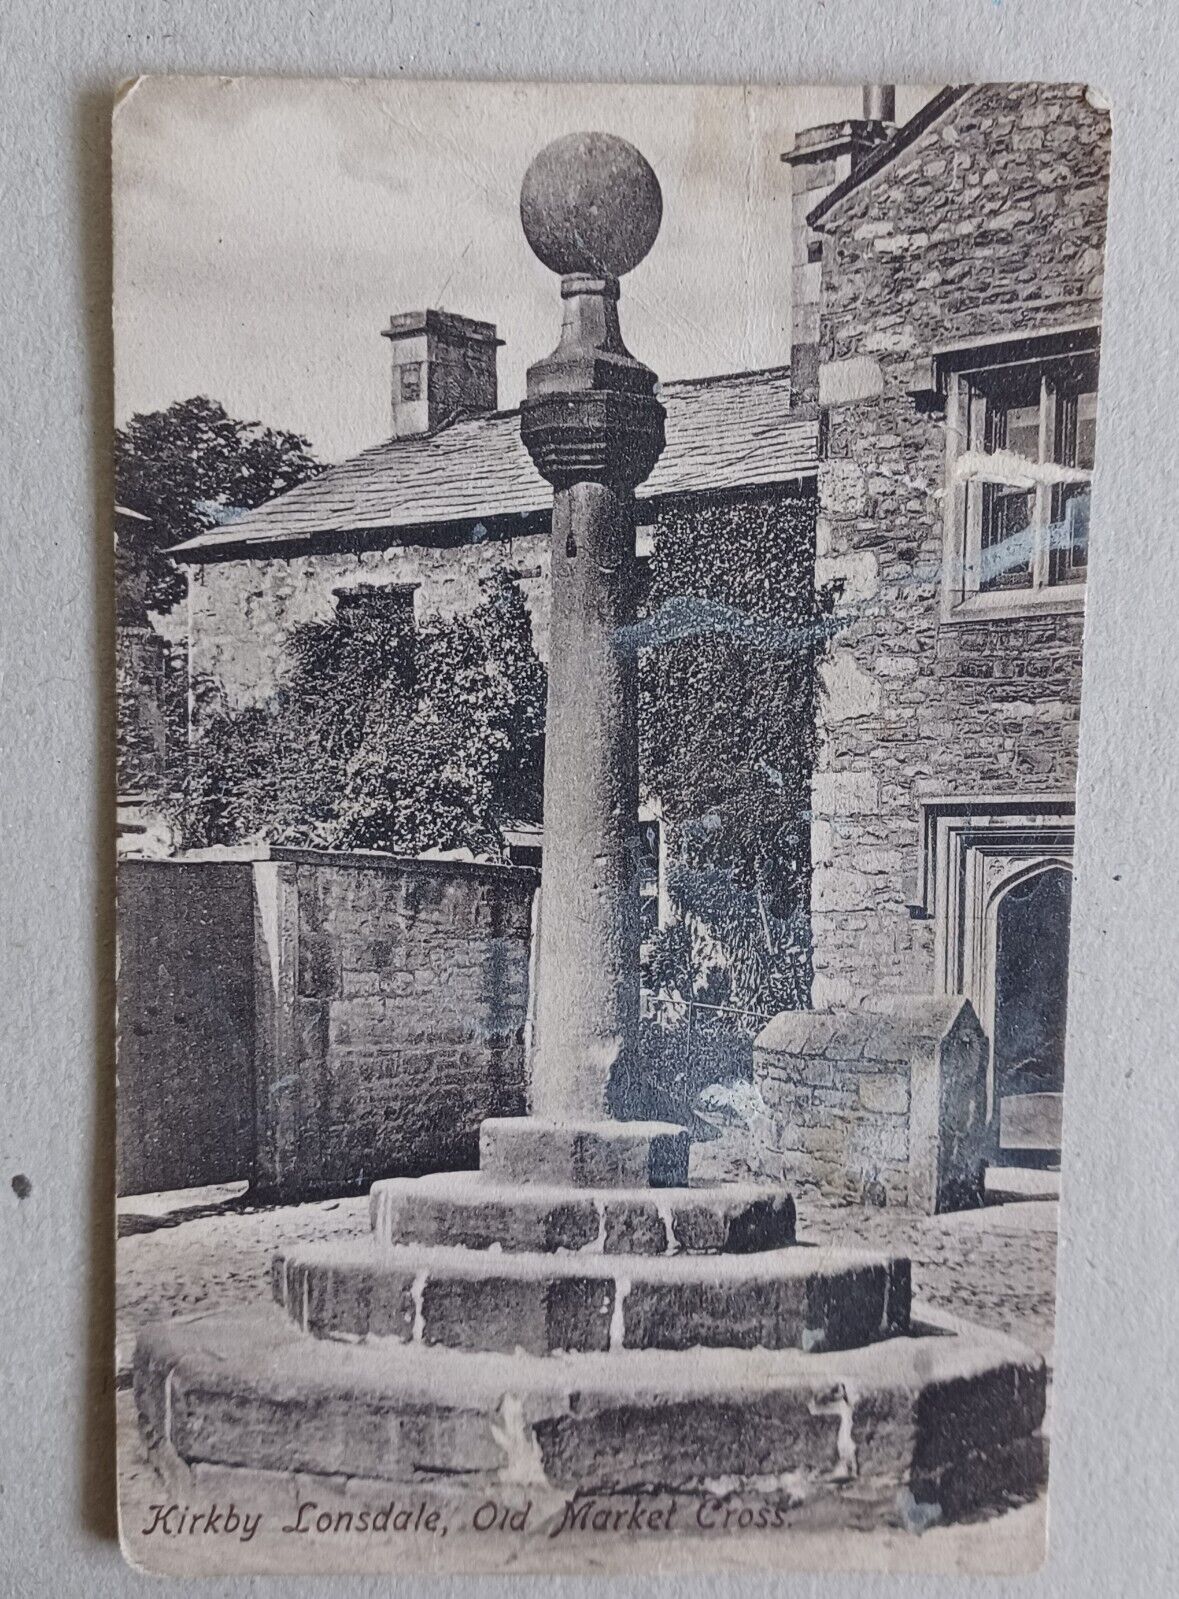 House Clearance - Cumbria. Kirkby Lonsdale. Old Market Cross. Black and white service.